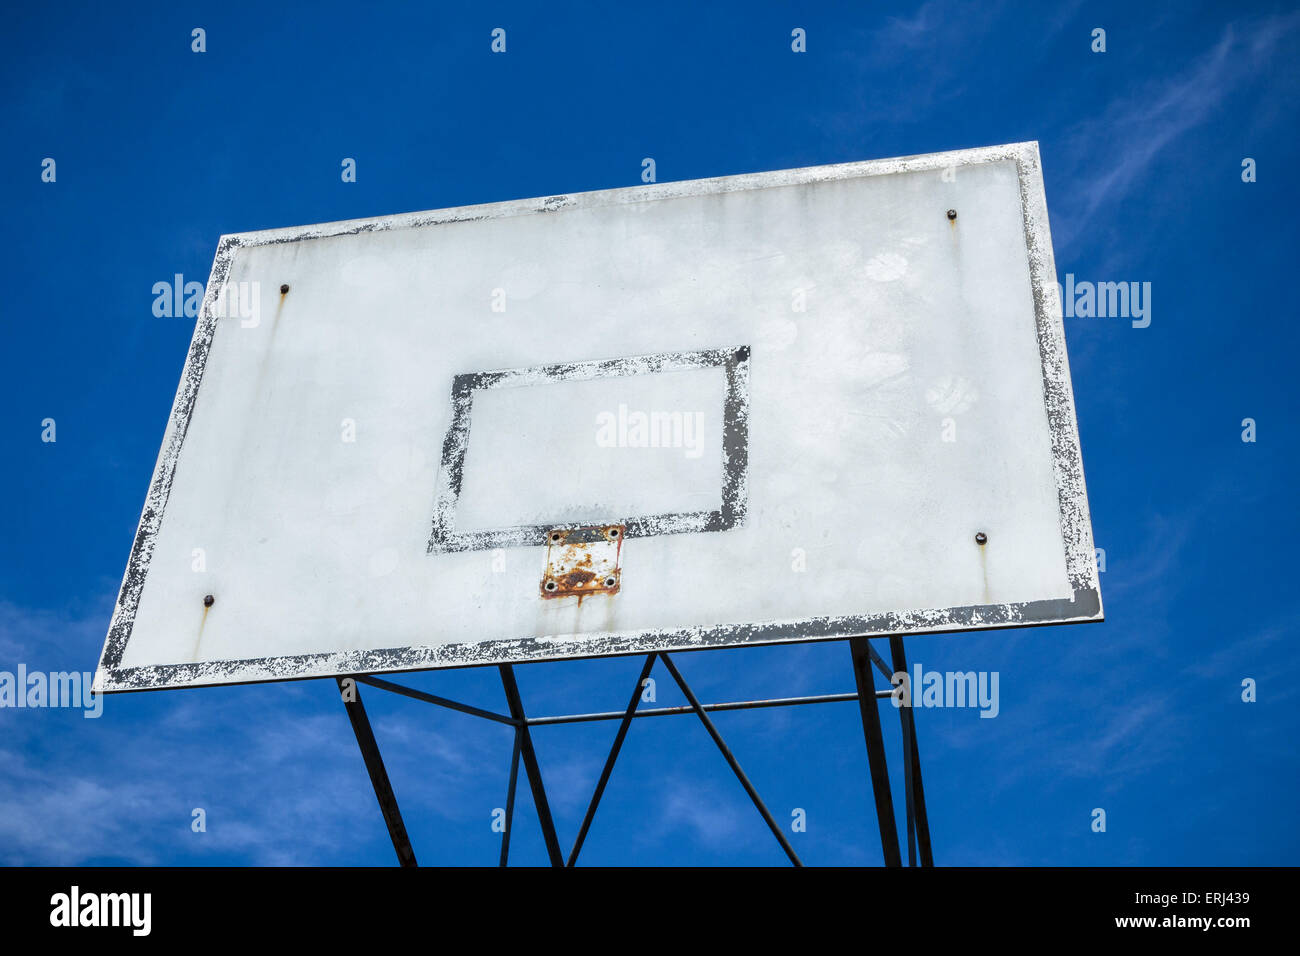 An old basketball hoop consumed by games and matches. Stock Photo